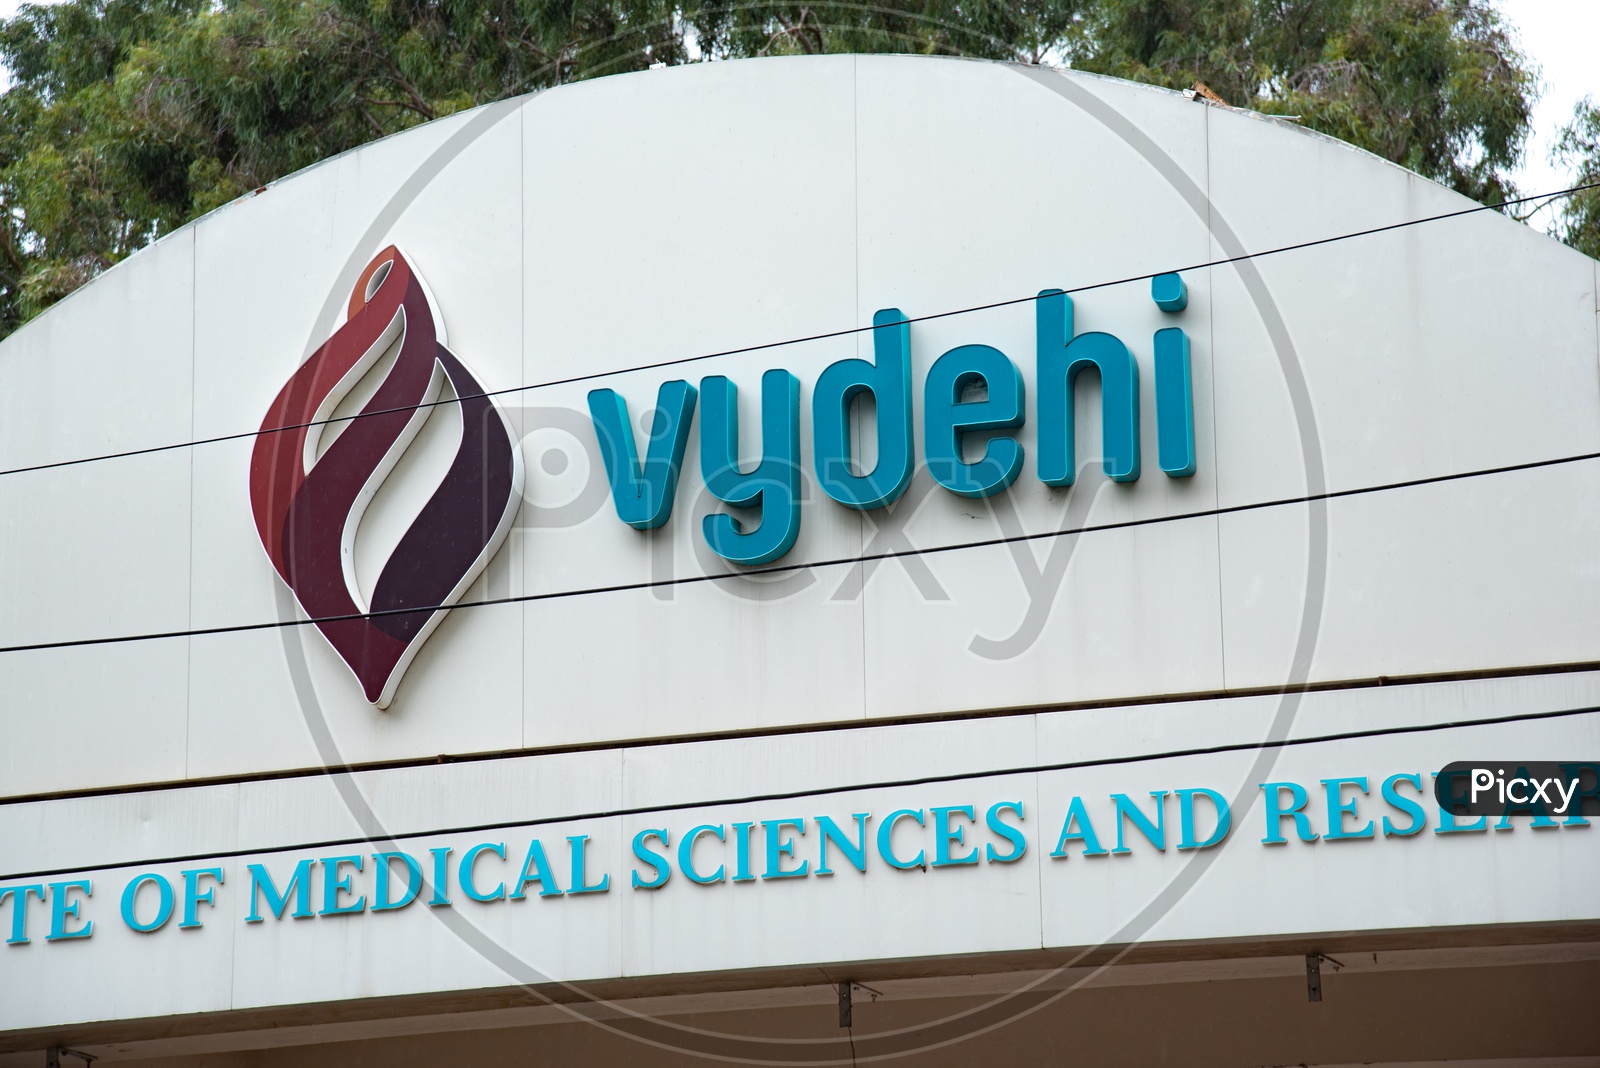 Vydehi Institute of Medical Sciences and Research